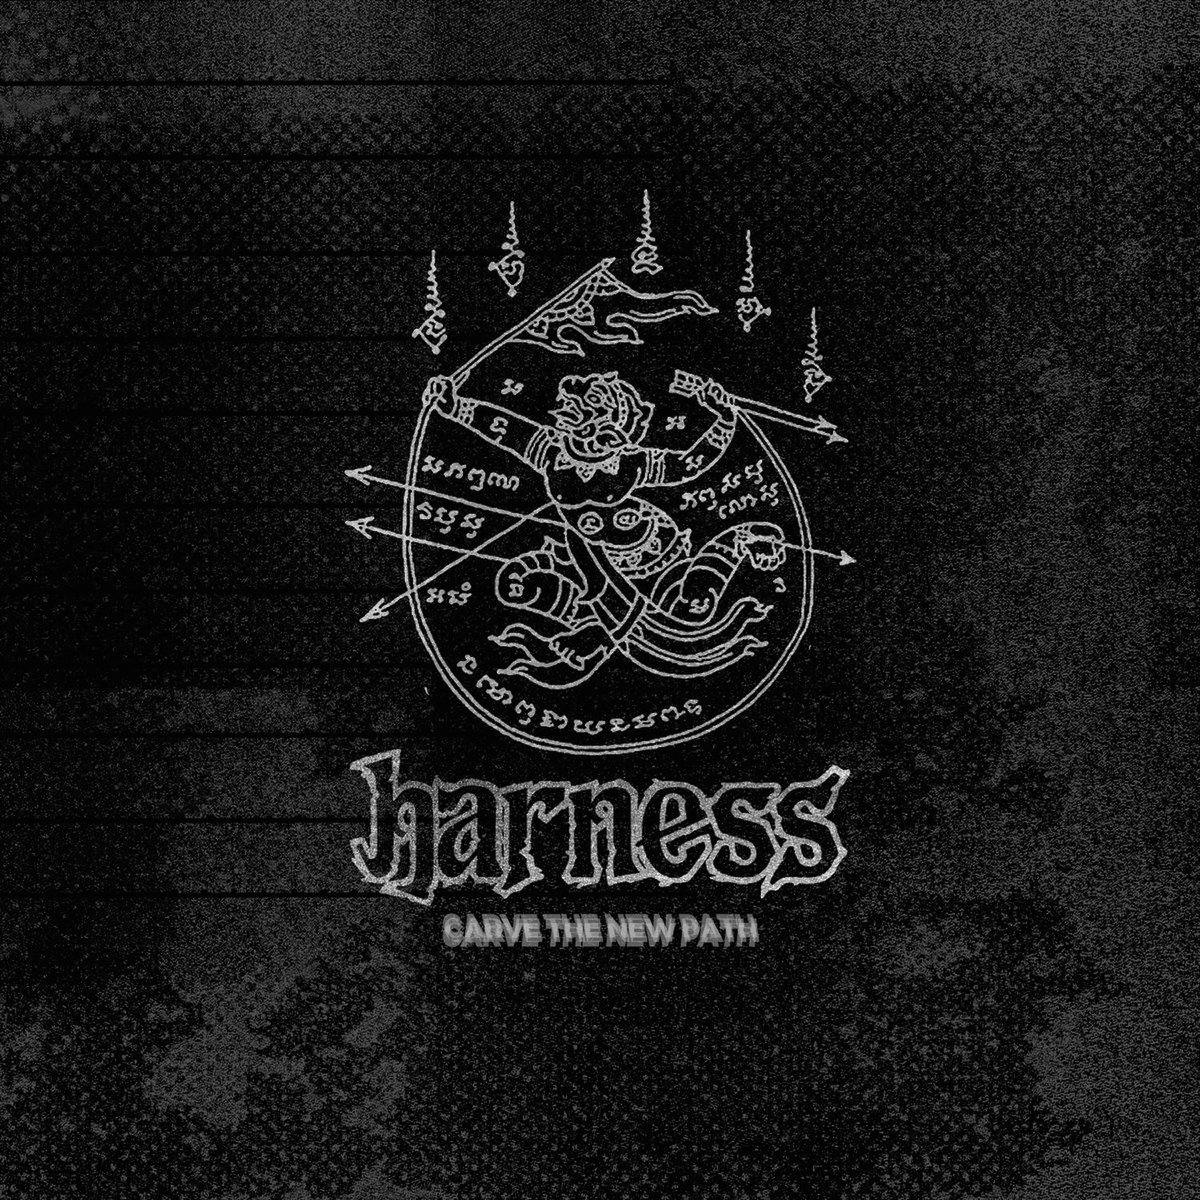 Buy – Harness "Carve the New Path" 7" – Band & Music Merch – Cold Cuts Merch